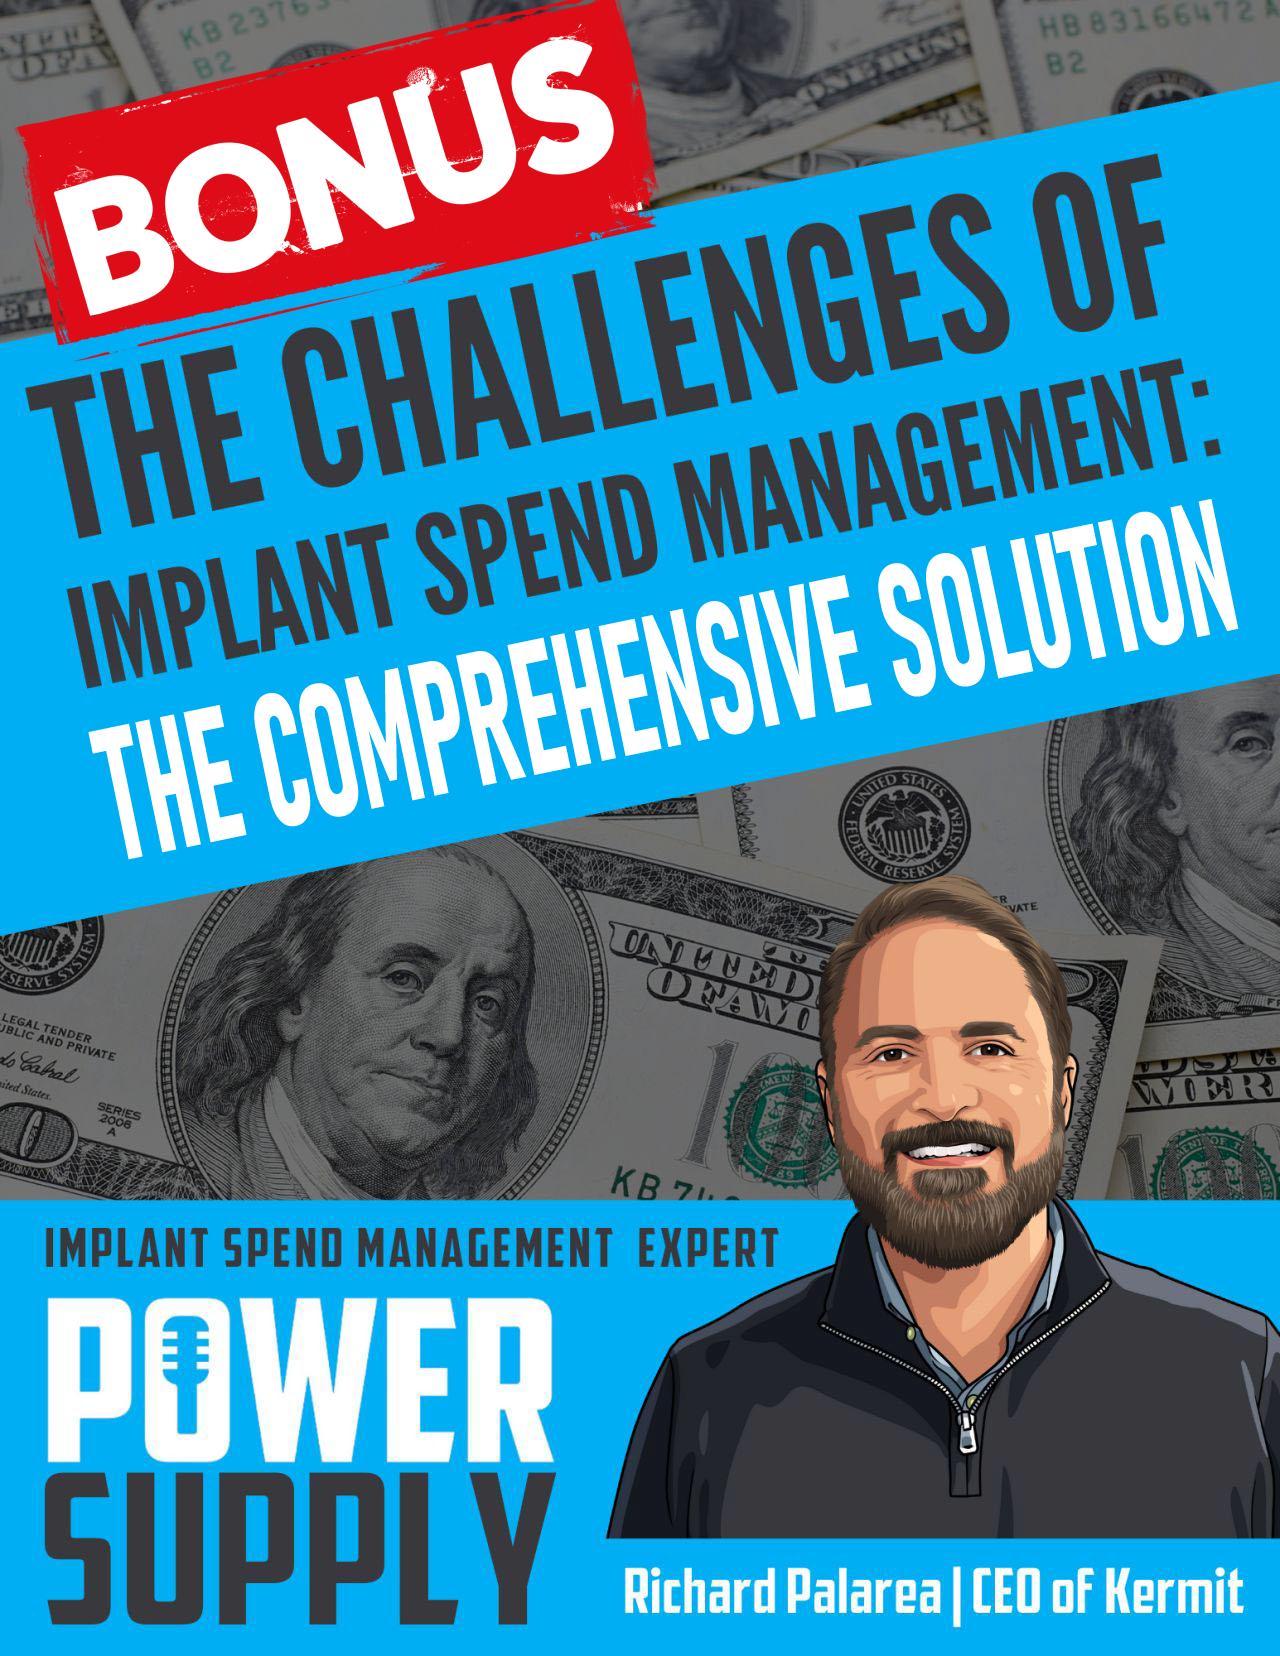 Power Supply Expert Series - BONUS - The Challenges of Implant Spend Management: The Comprehensive Solution